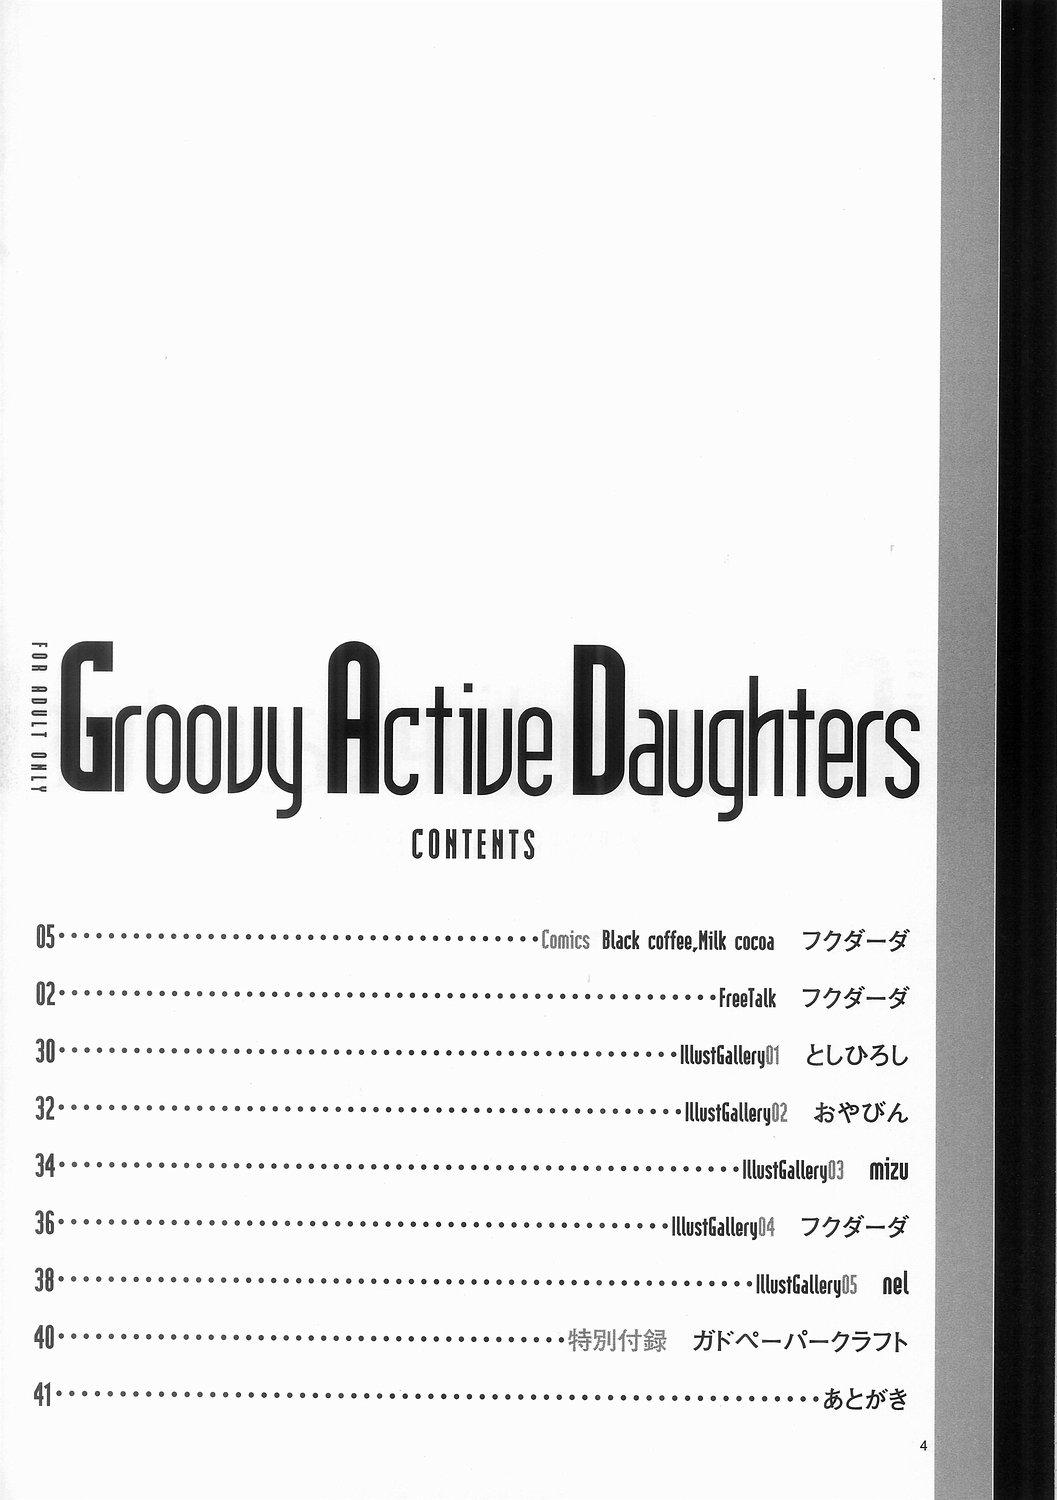 Italian Groovy Active Daughters - Gad guard Cream - Page 4